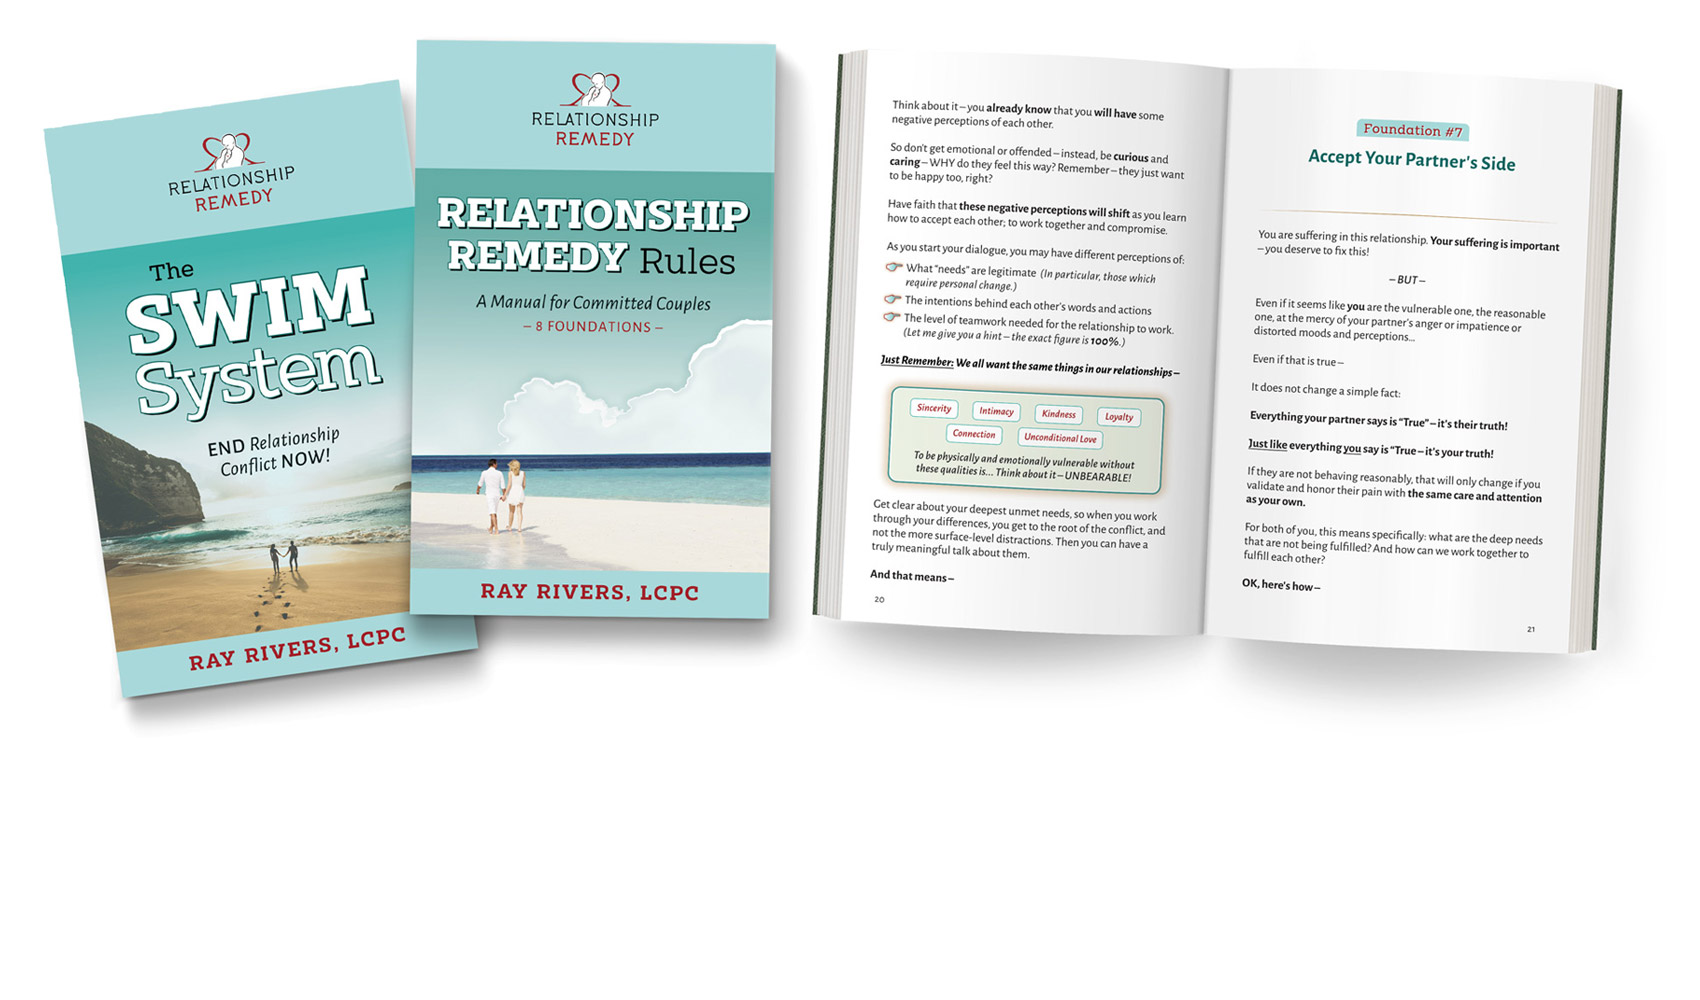 The SWIM System & Relationship Remedy Rules – Ray Rivers